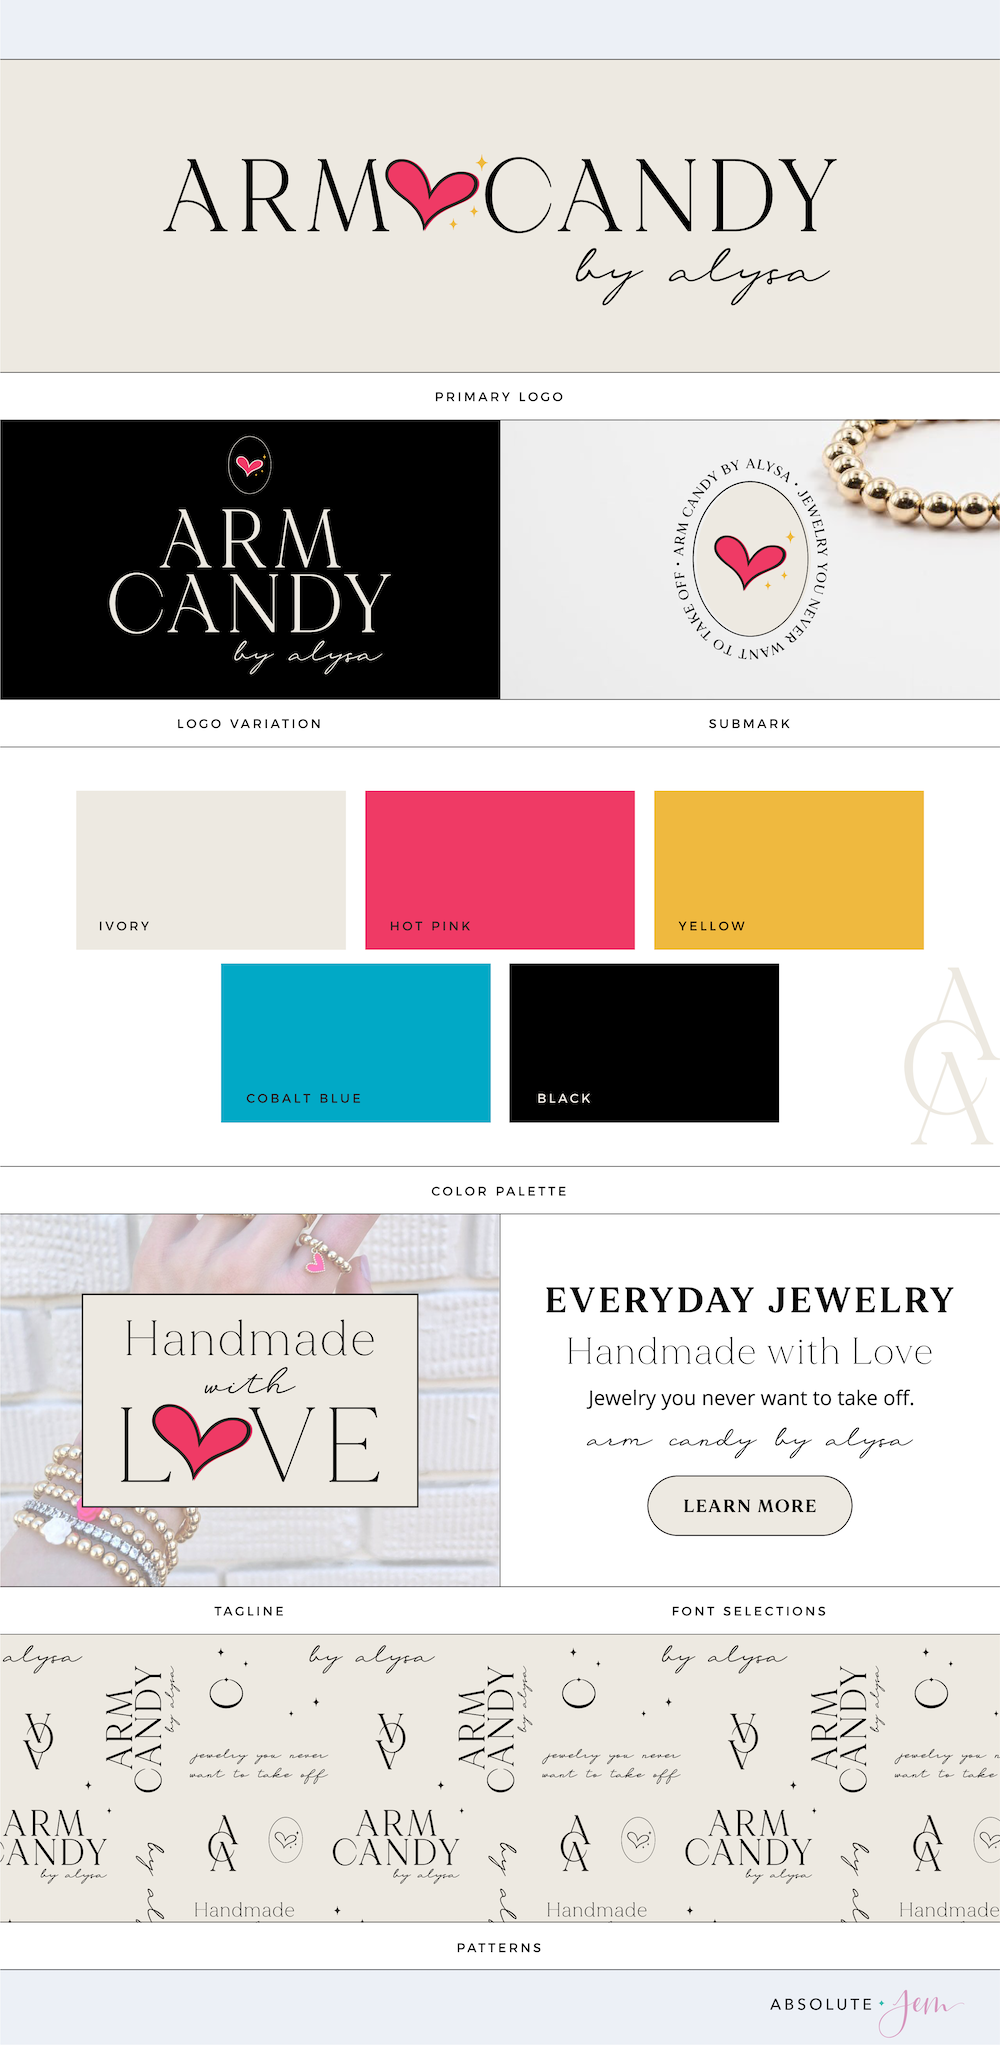 Brand Board for Arm Candy by Alysa by Absolute JEM